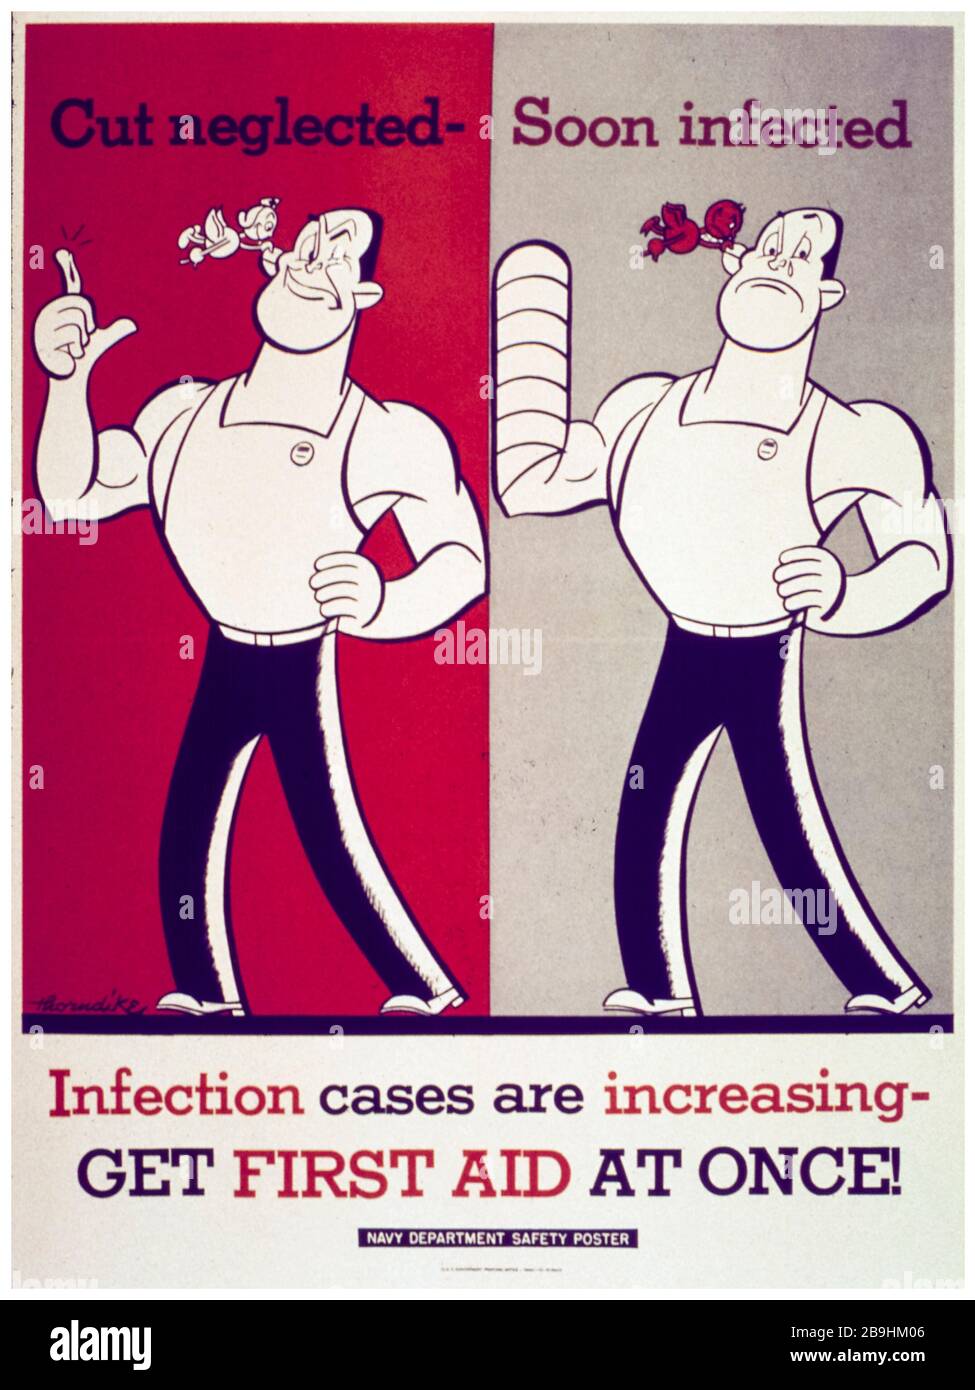 US WW2, Health campaign poster, Cut Neglected, Soon Infected, 1941-1945 Stock Photo